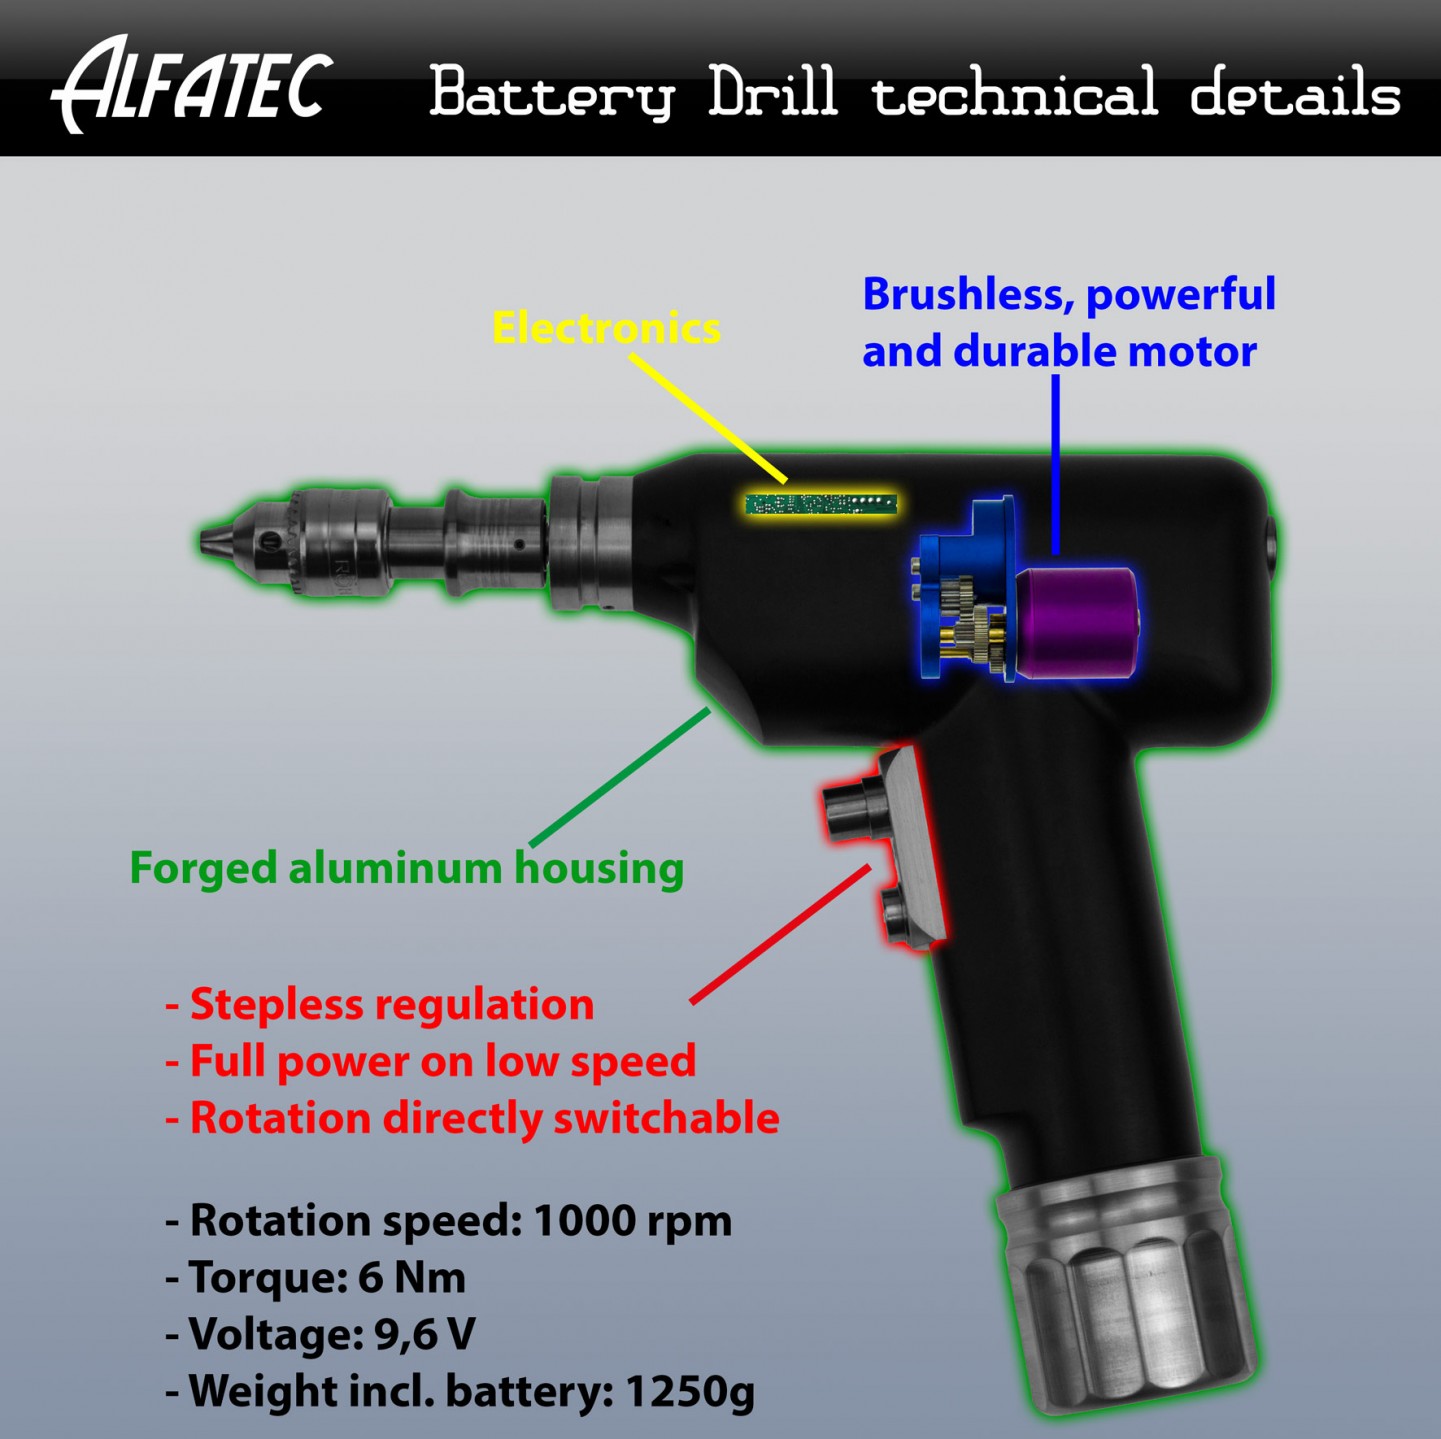 Battery Drill technical details from Alfatec Power Tools